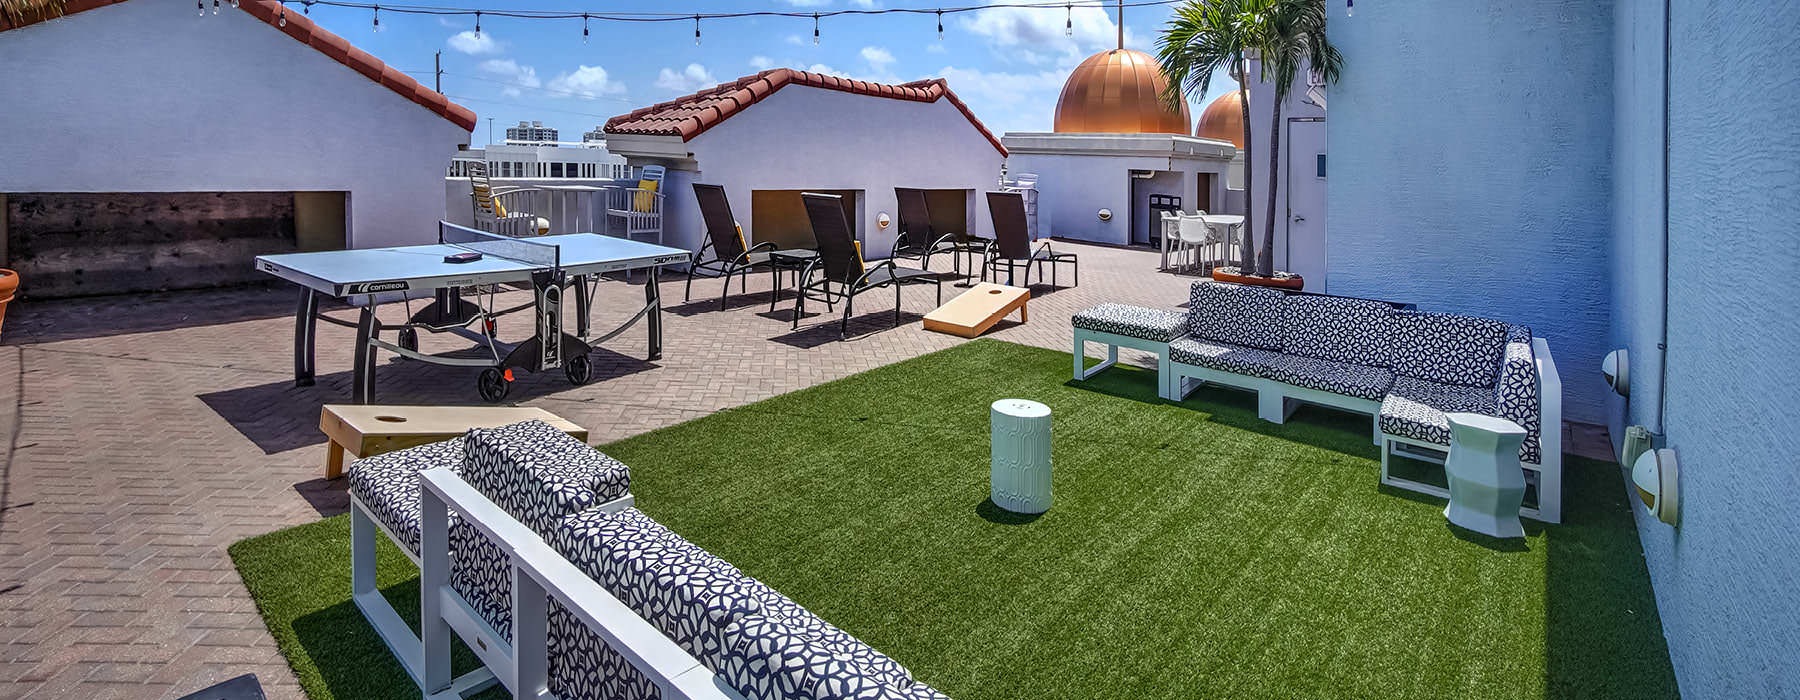 rooftop terrace with ping pong table and sitting areas